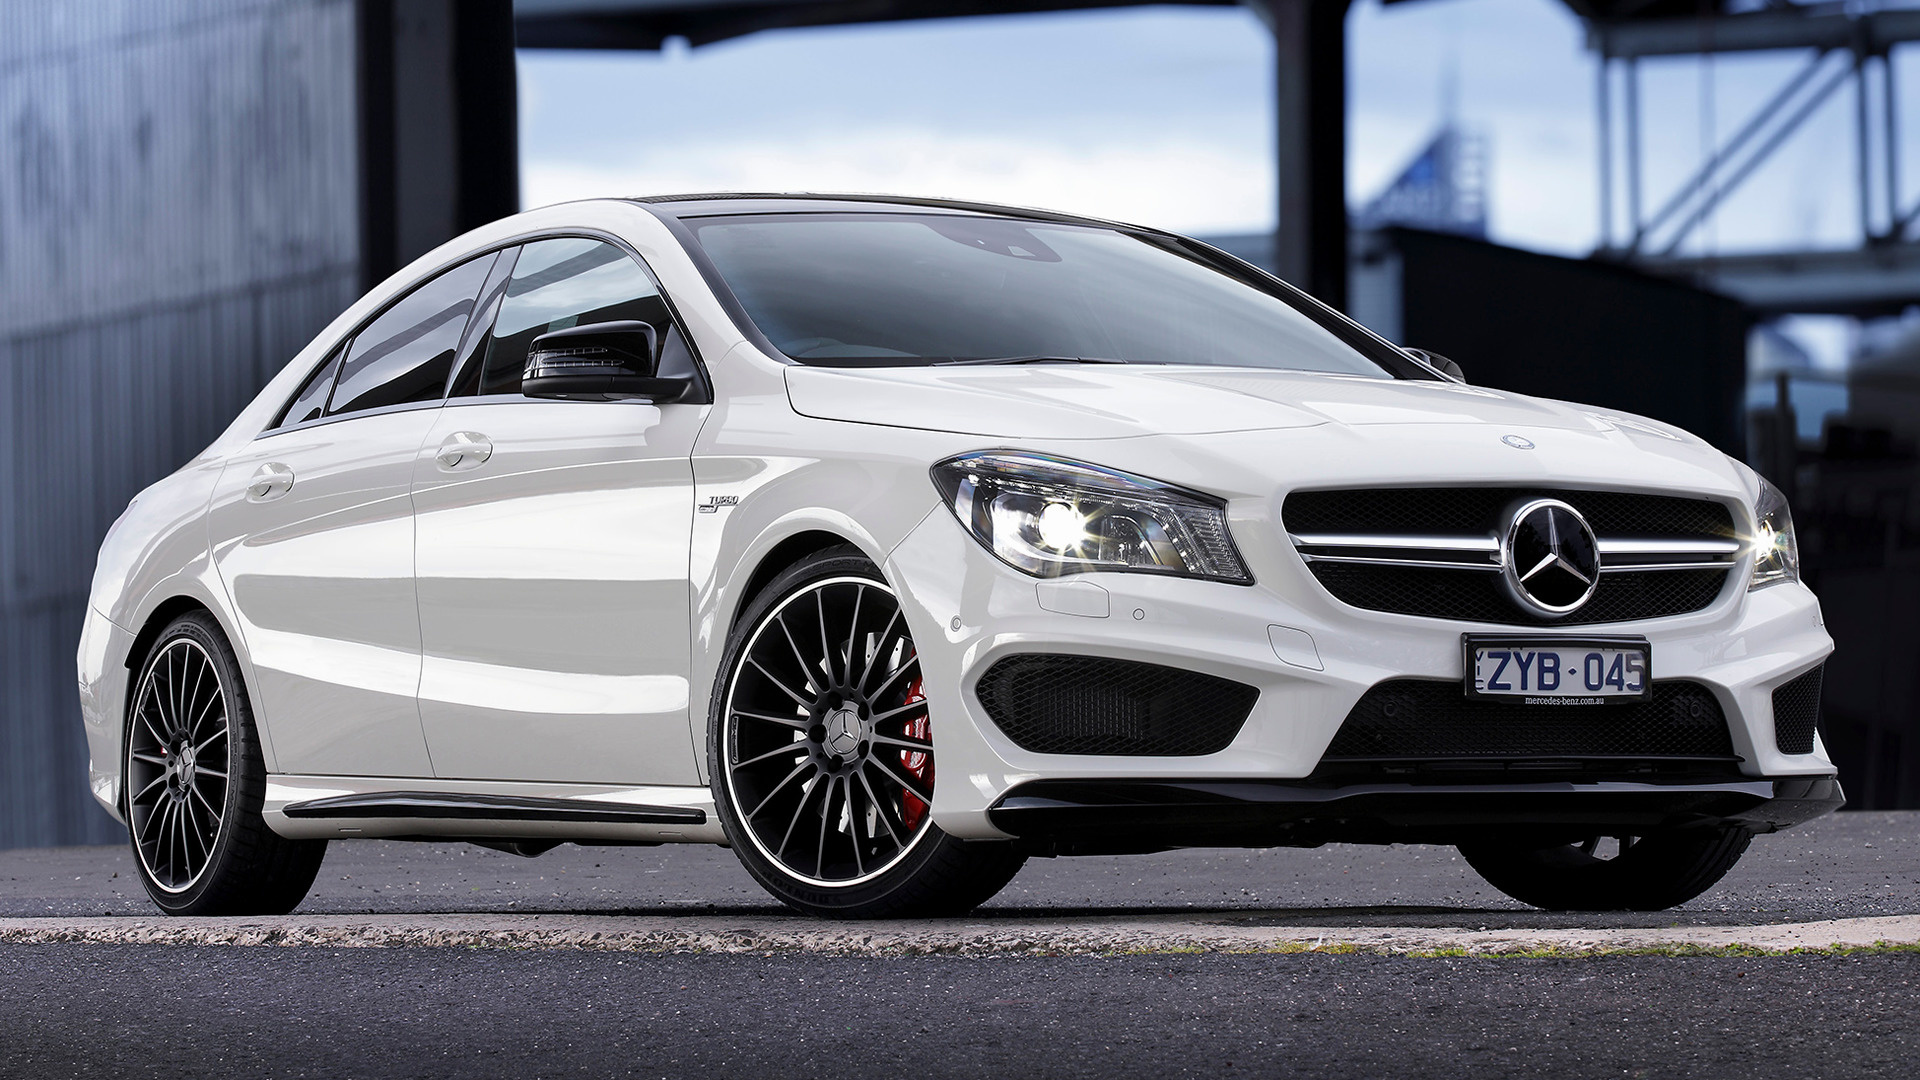 2013 Mercedes Benz CLA 45 AMG AU   Wallpapers and HD Images